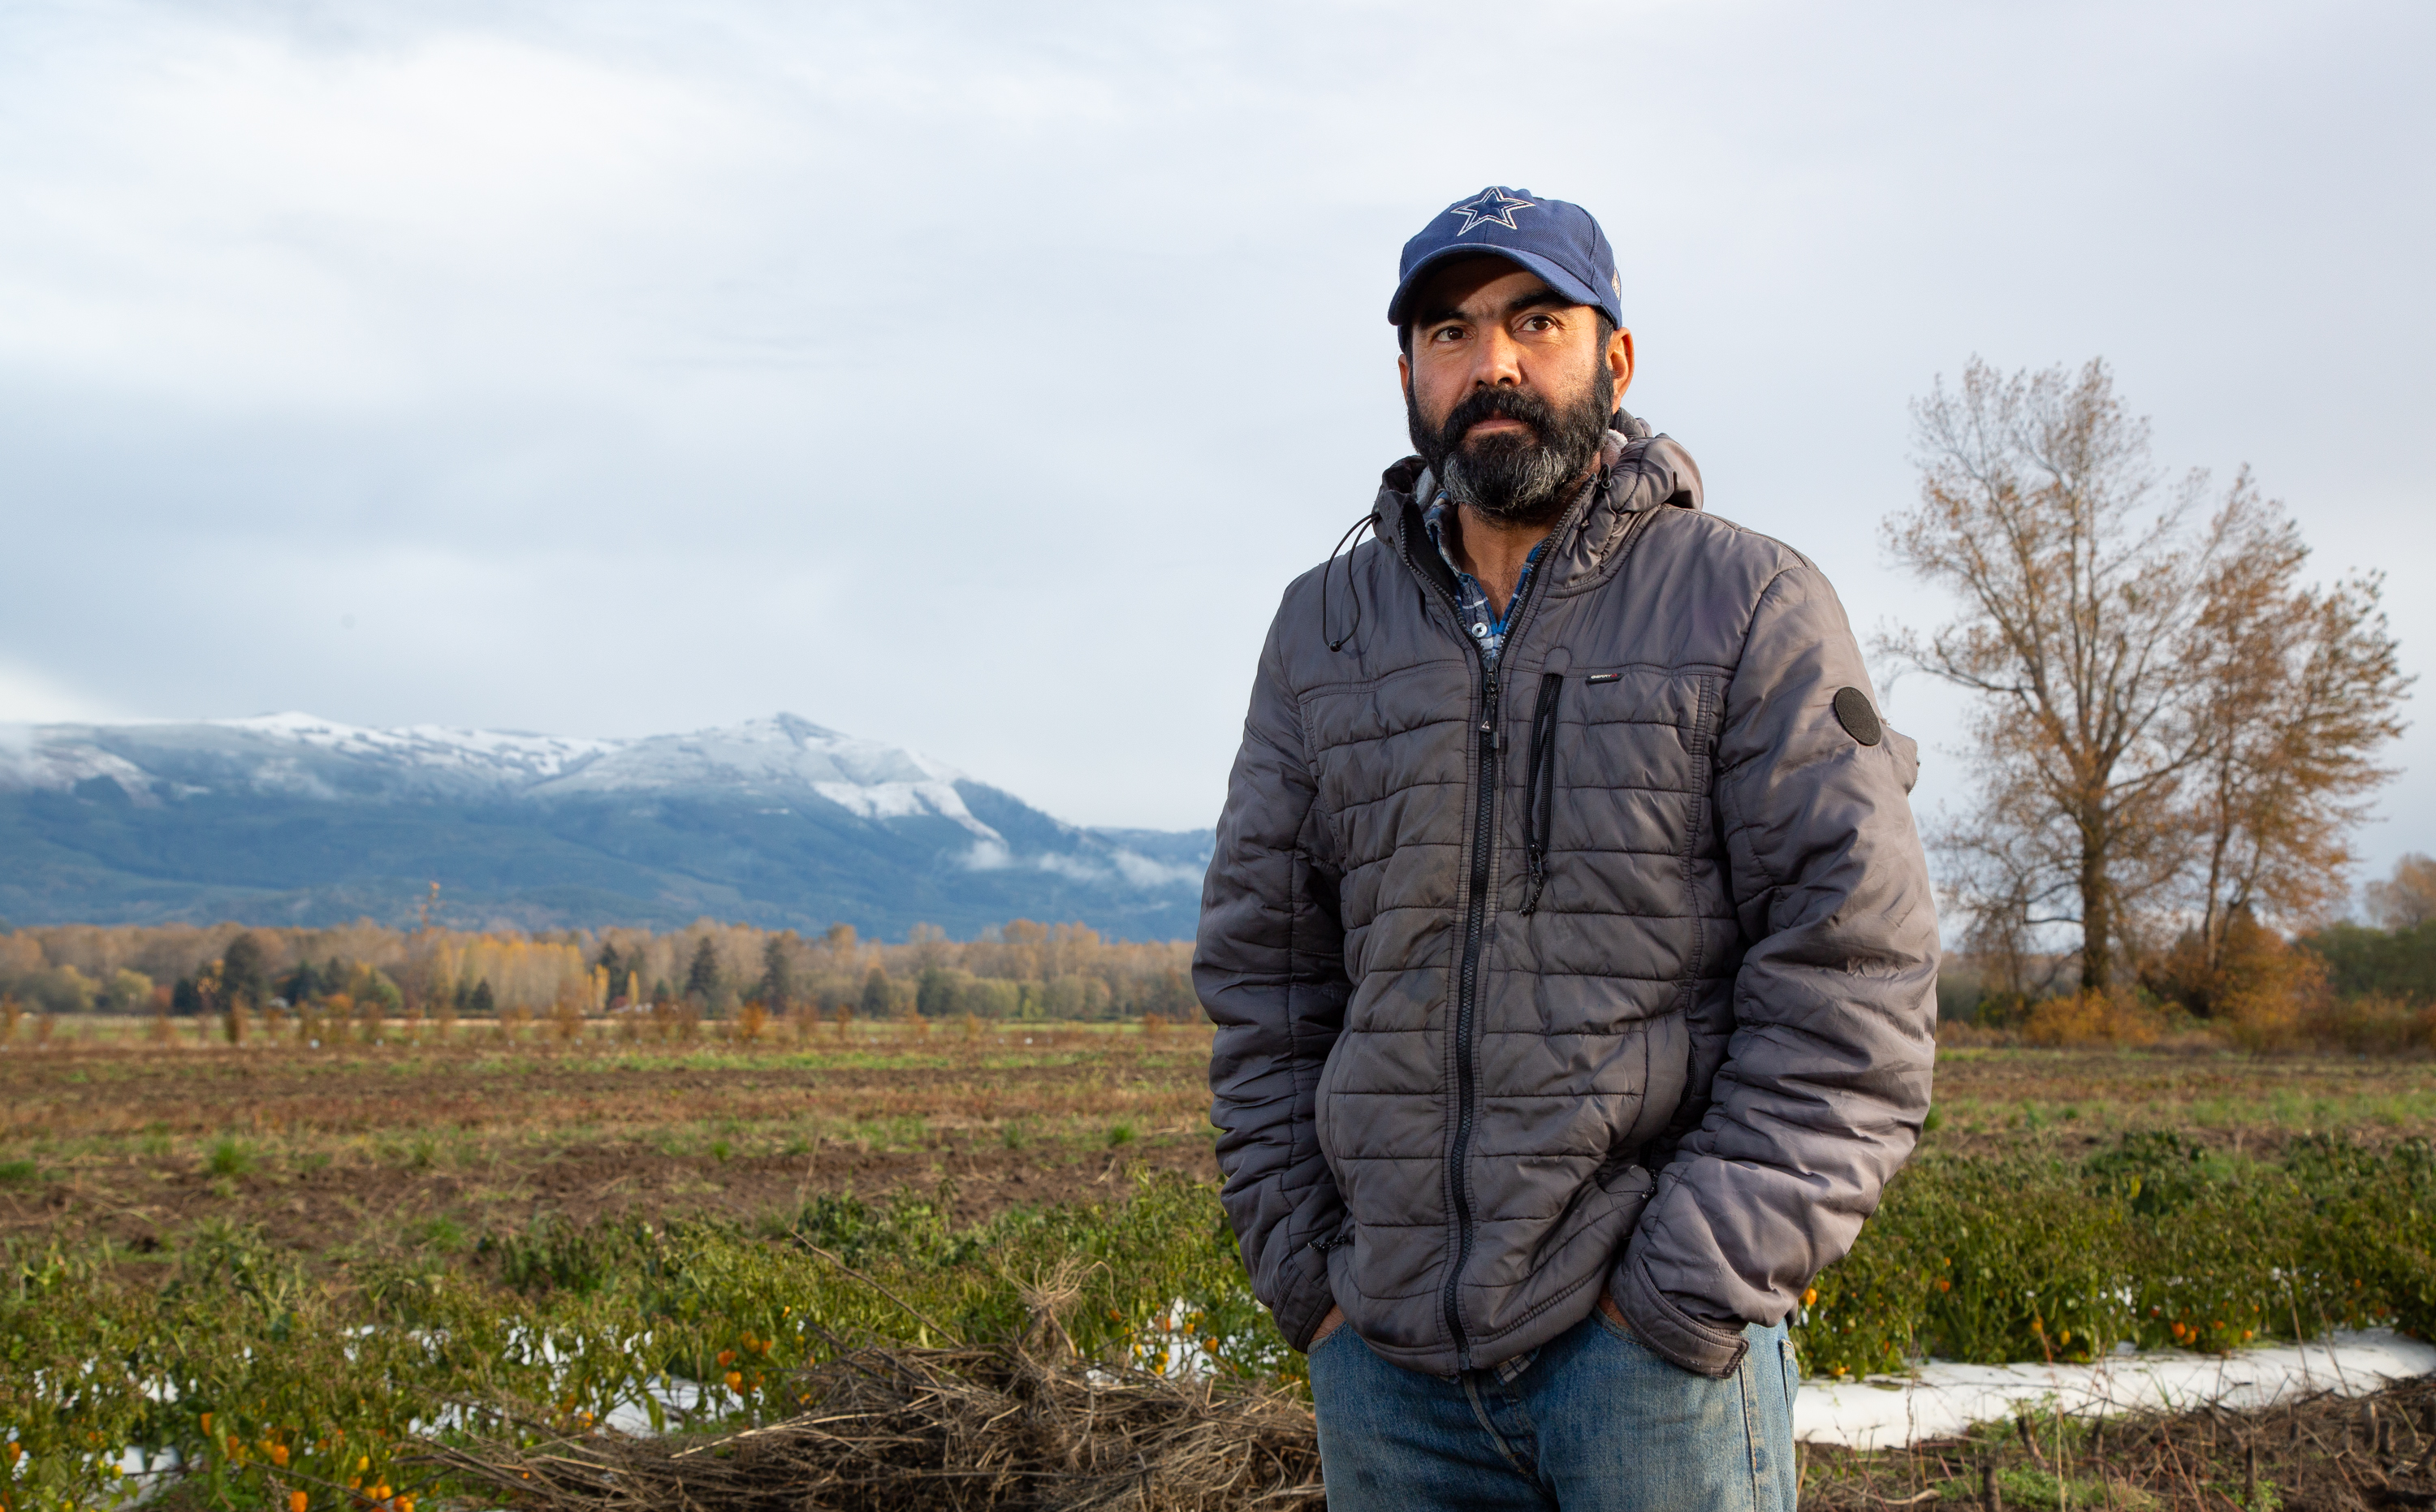 Part V: In November 2021, Francisco Farias' 6-acre farm was heavily flooded by the Skagit River.